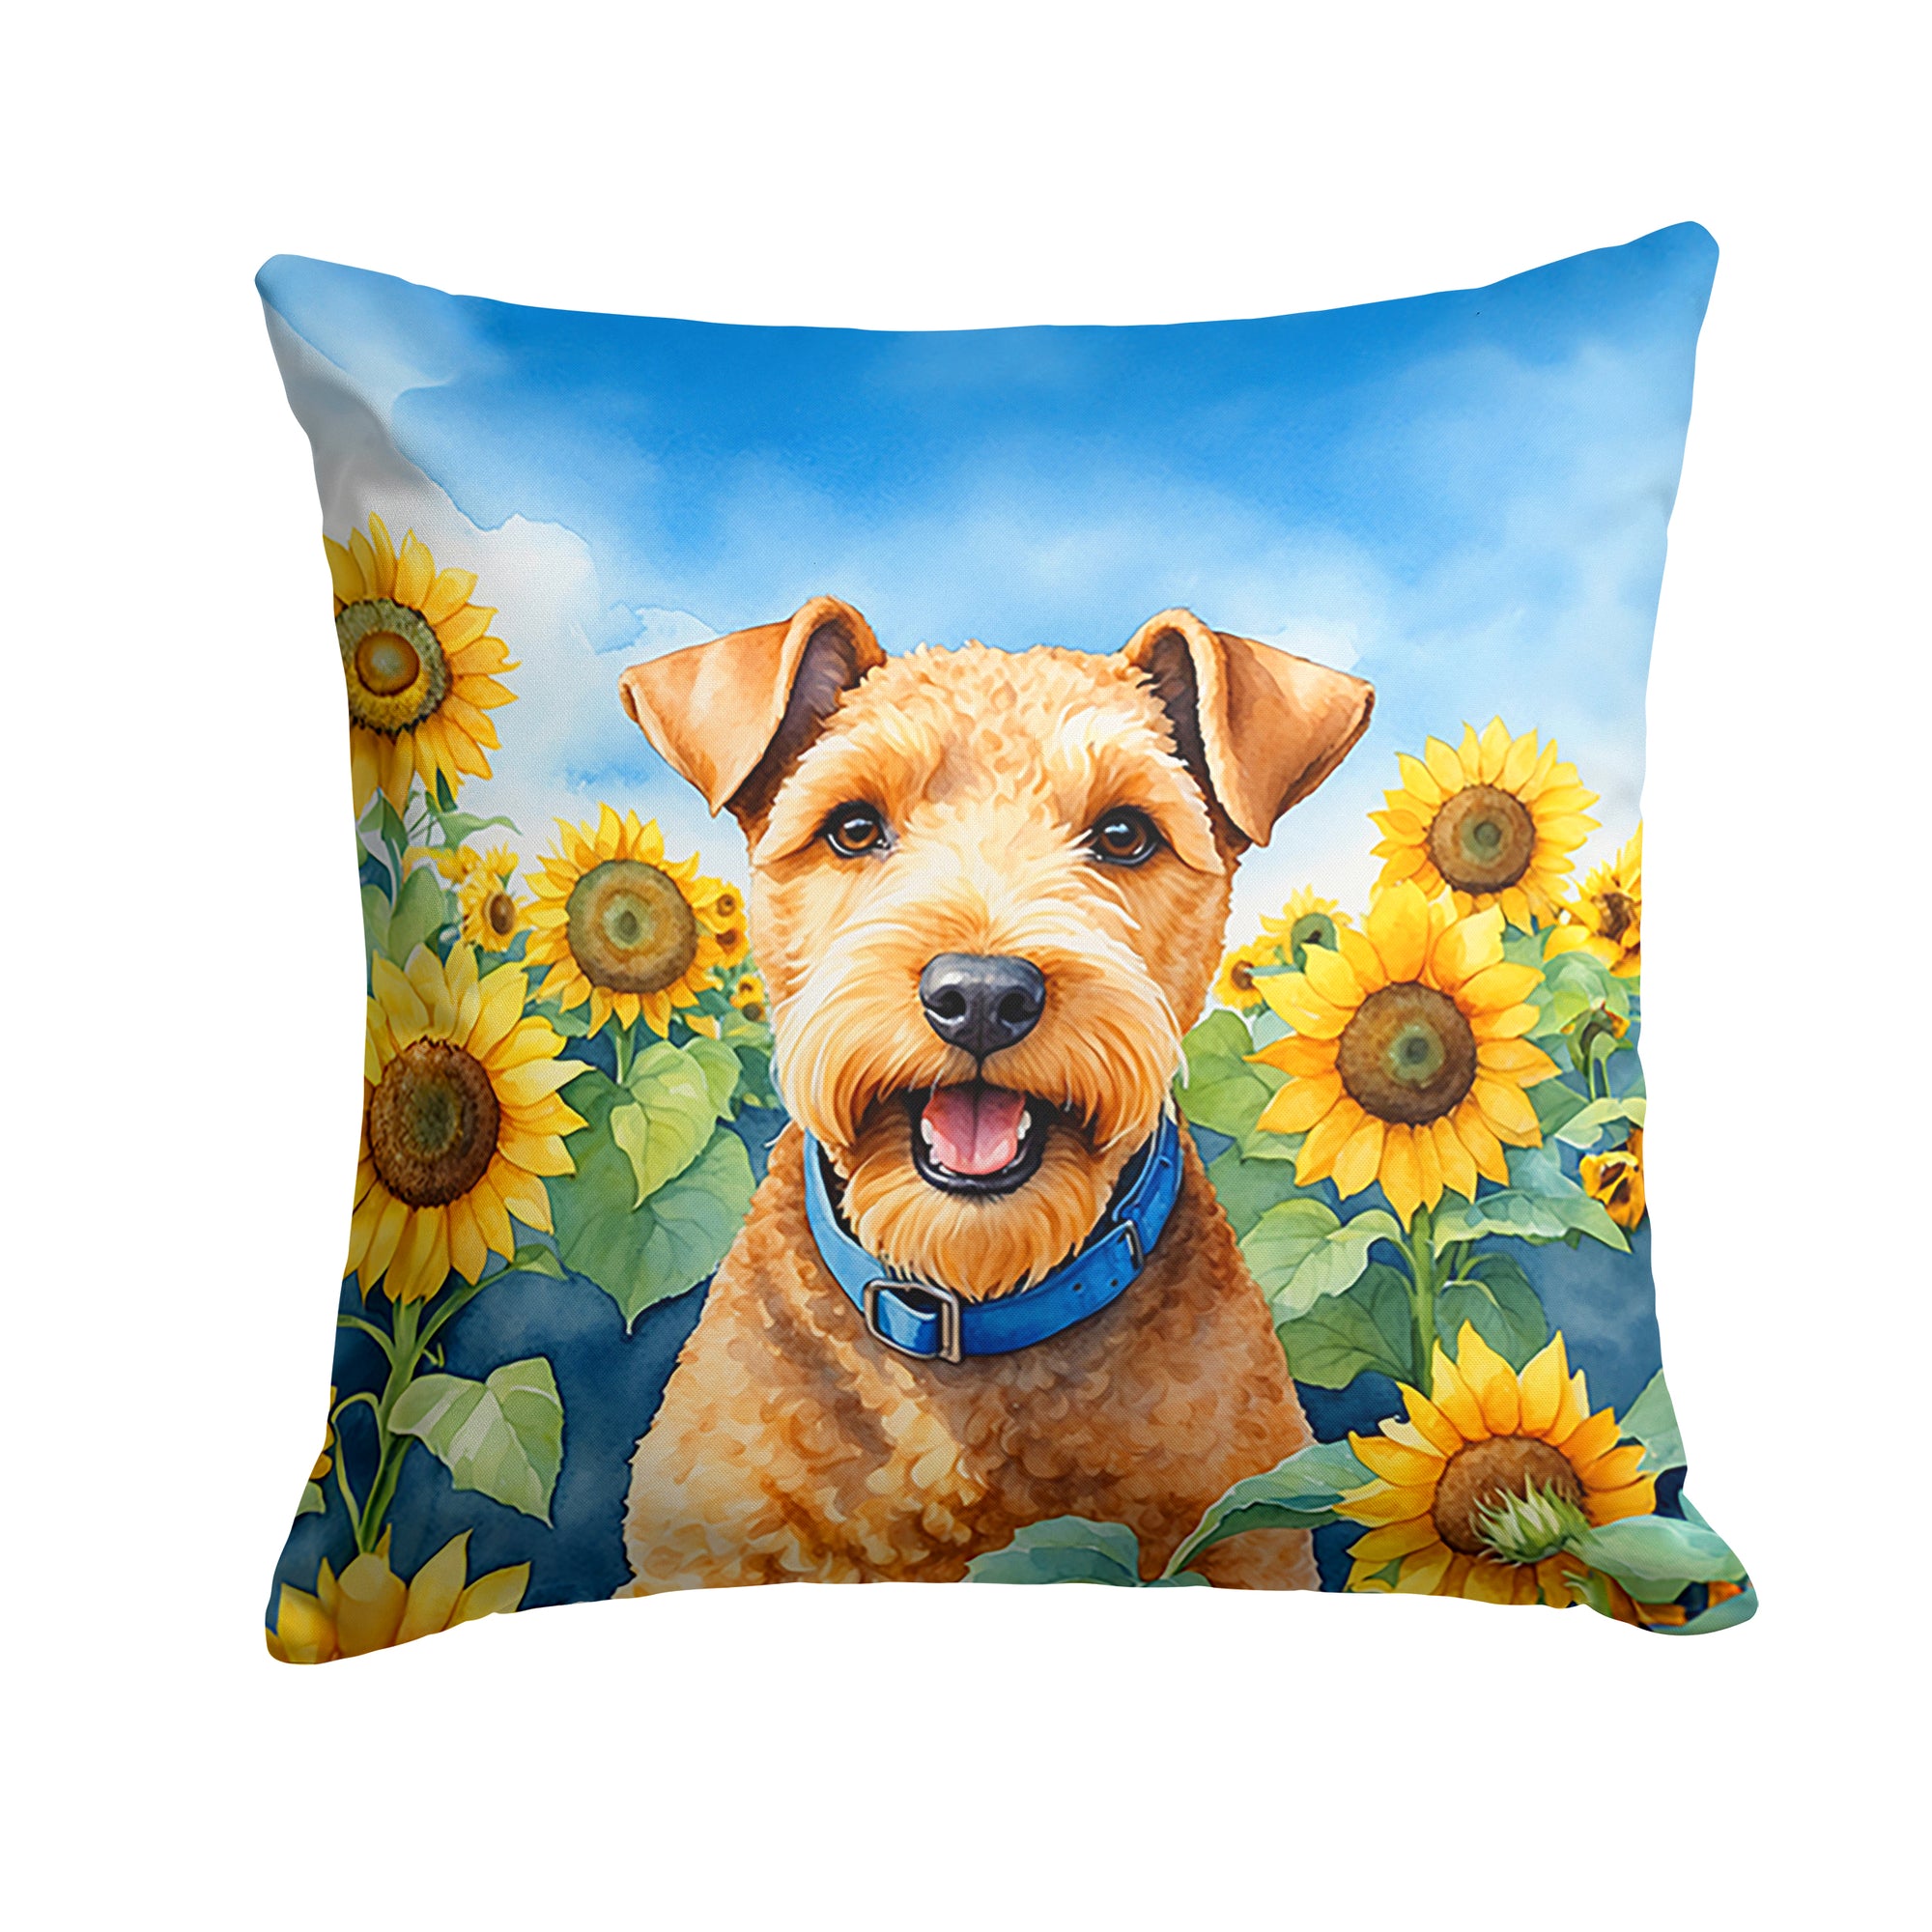 Buy this Lakeland Terrier in Sunflowers Throw Pillow